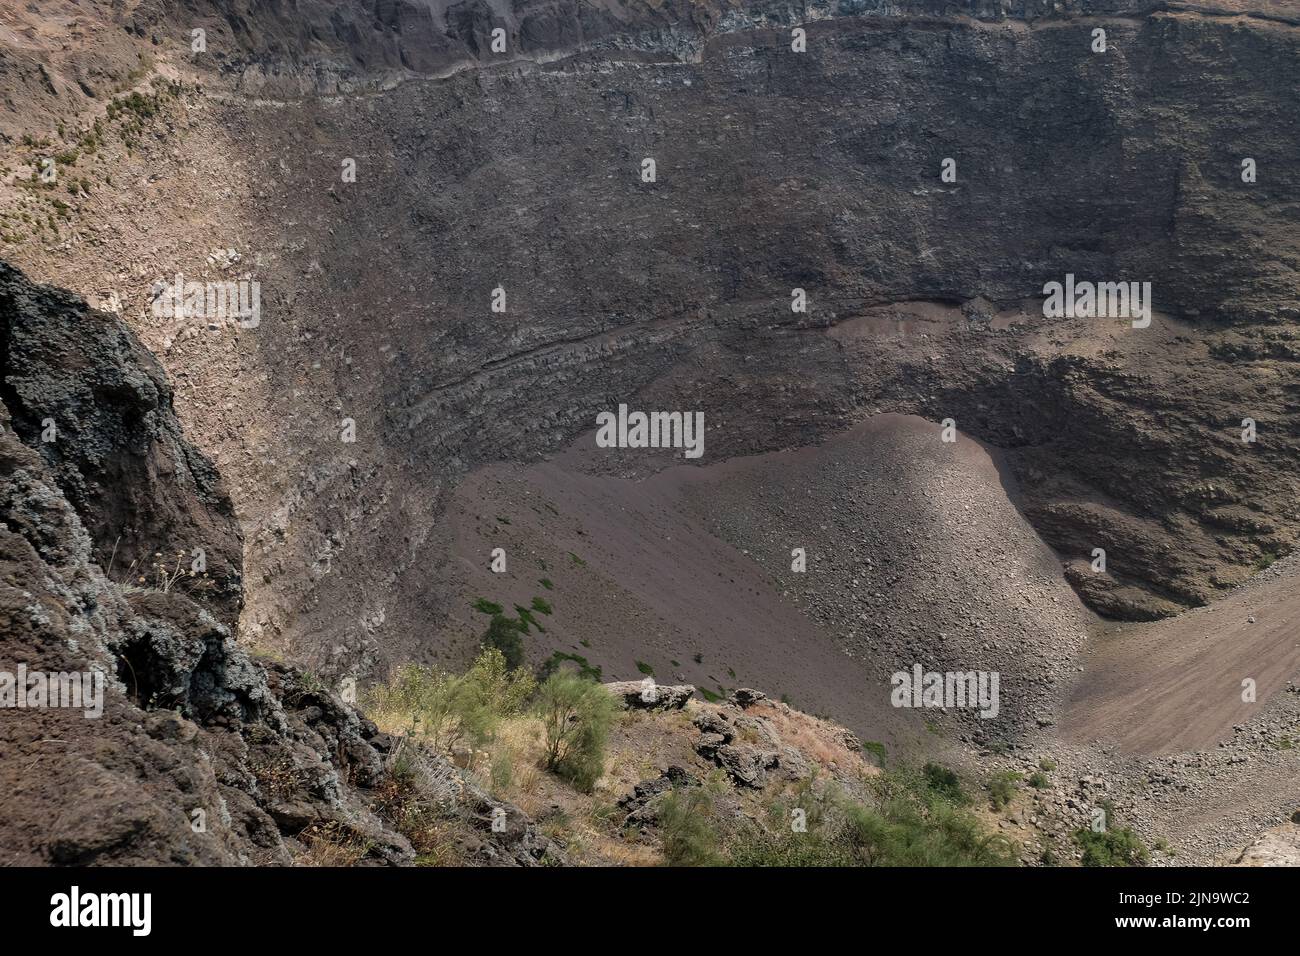 Close-ups around the cone at the top of Mount Vesuvius Italy showing the different layers of rock looking towards the closed vent. Stock Photo